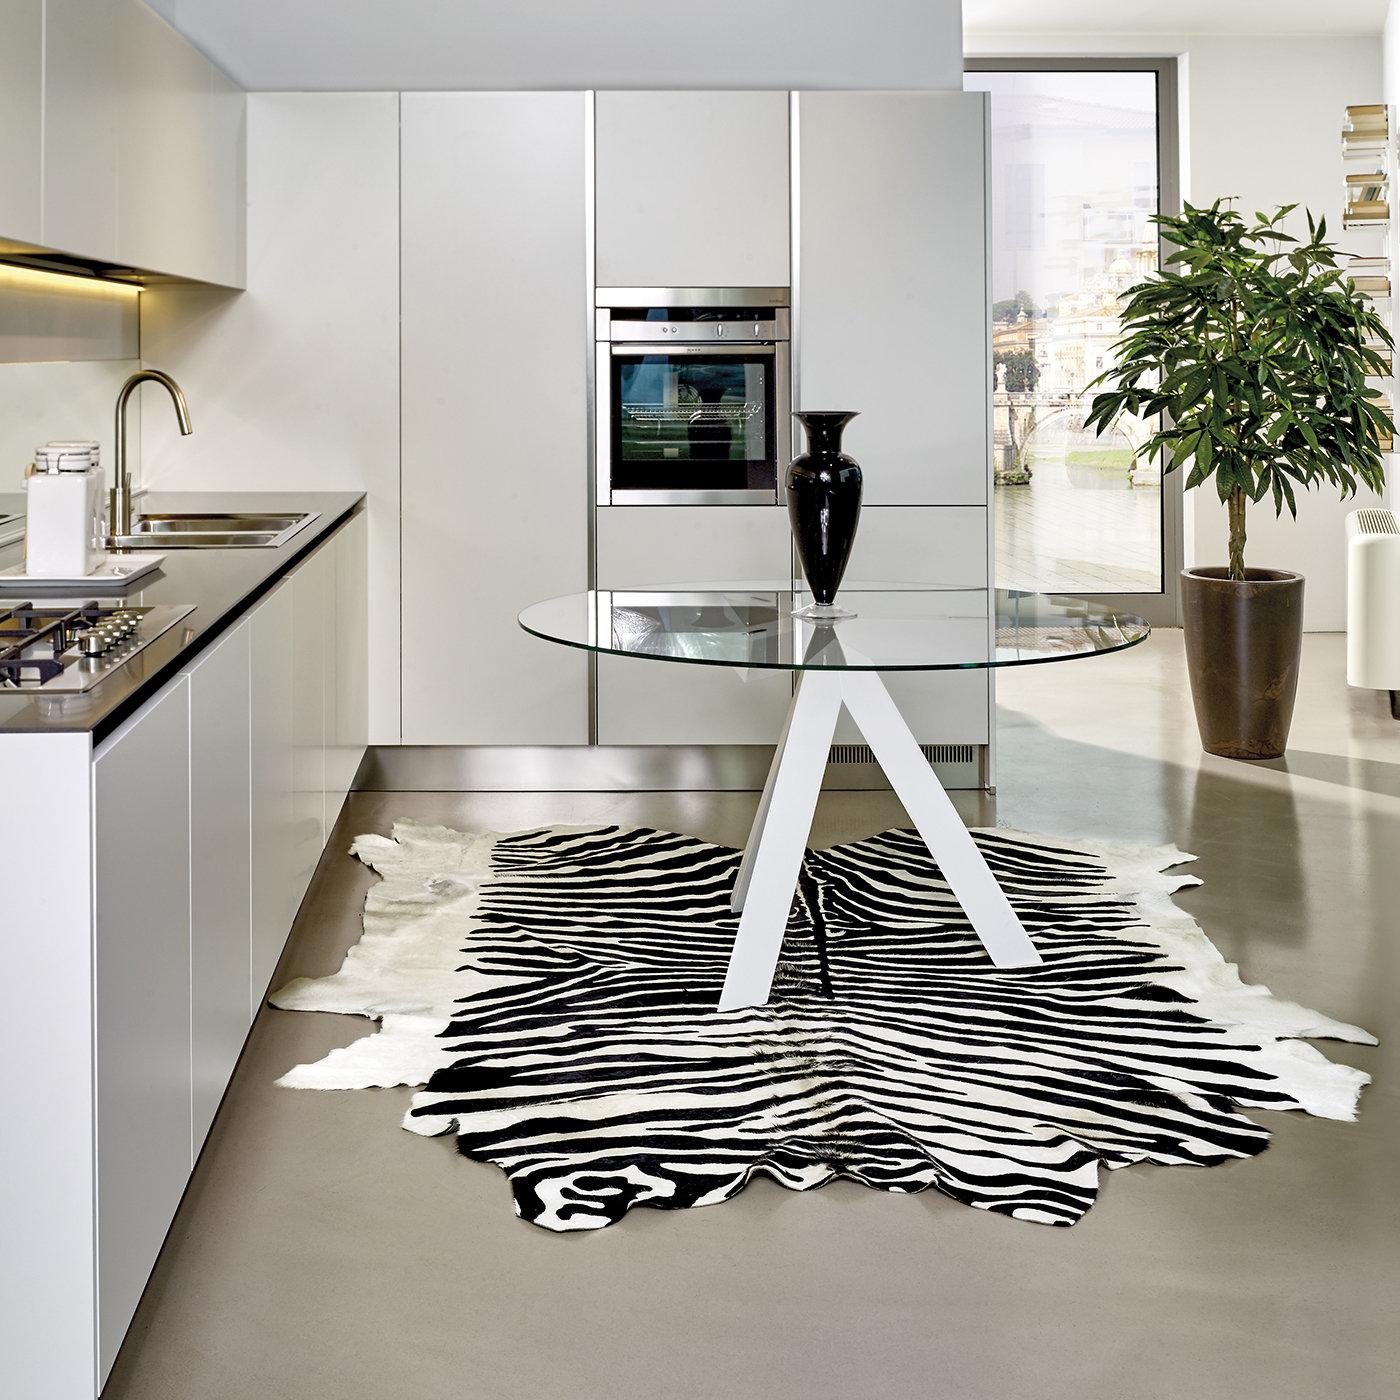 The Zebra-Striped Printed Leather Black & White Rug takes inspiration from the appeal of the animalier style. A timeless pattern full of character will make this accessory the hero in a designer house for lovers of animalier-jungle details. As these